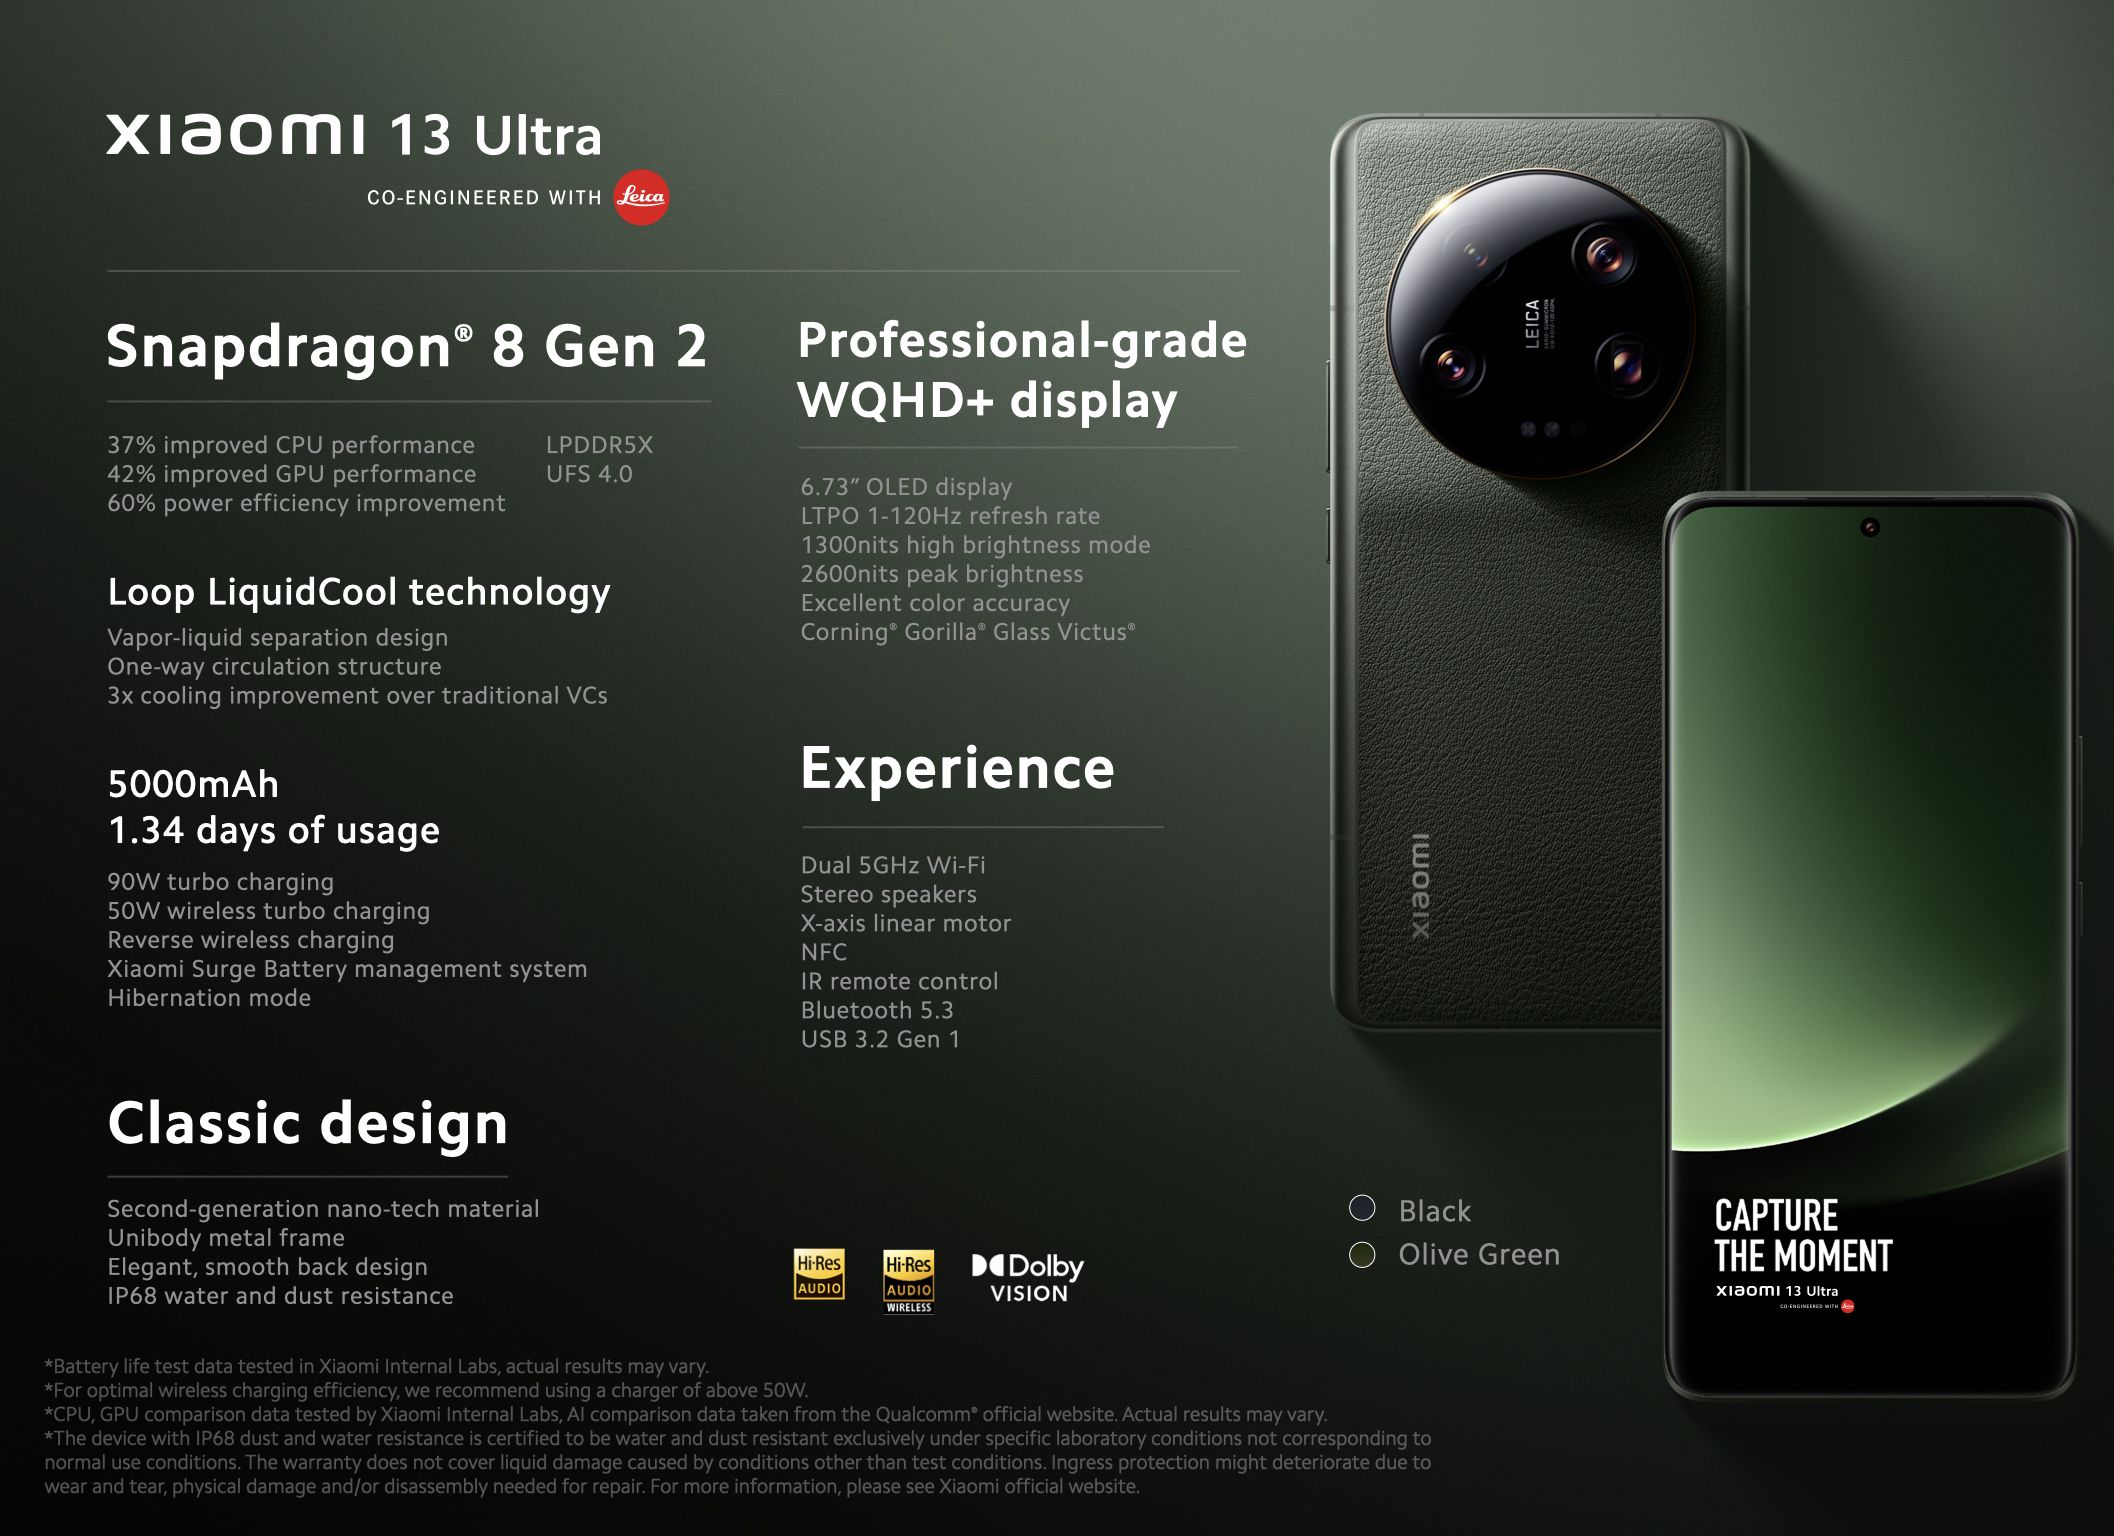 Xiaomi 13 Ultra: Xiaomi's ultimate flagship smartphone with Leica